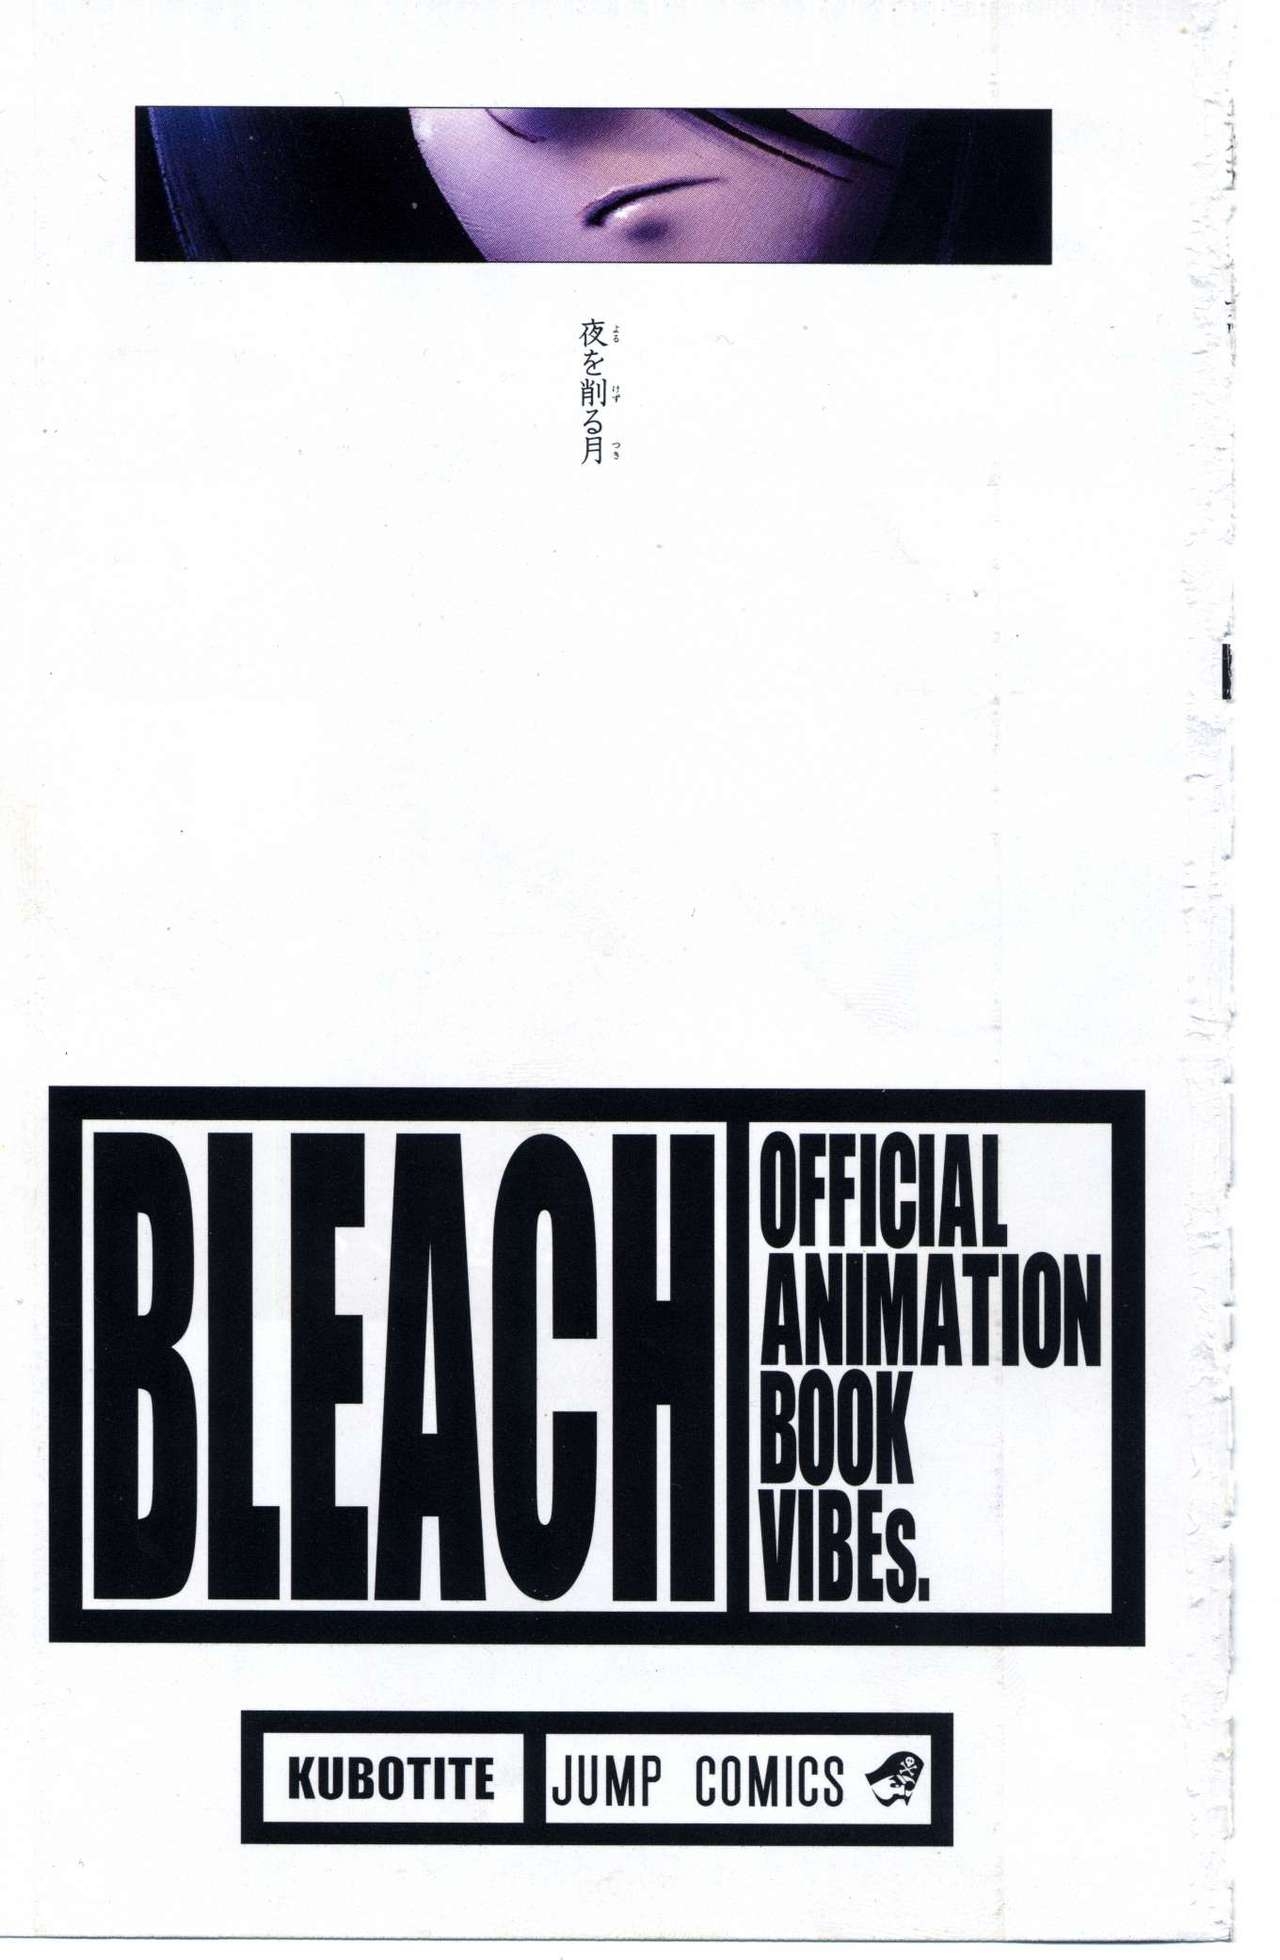 Bleach: Official Animation Book VIBEs 7